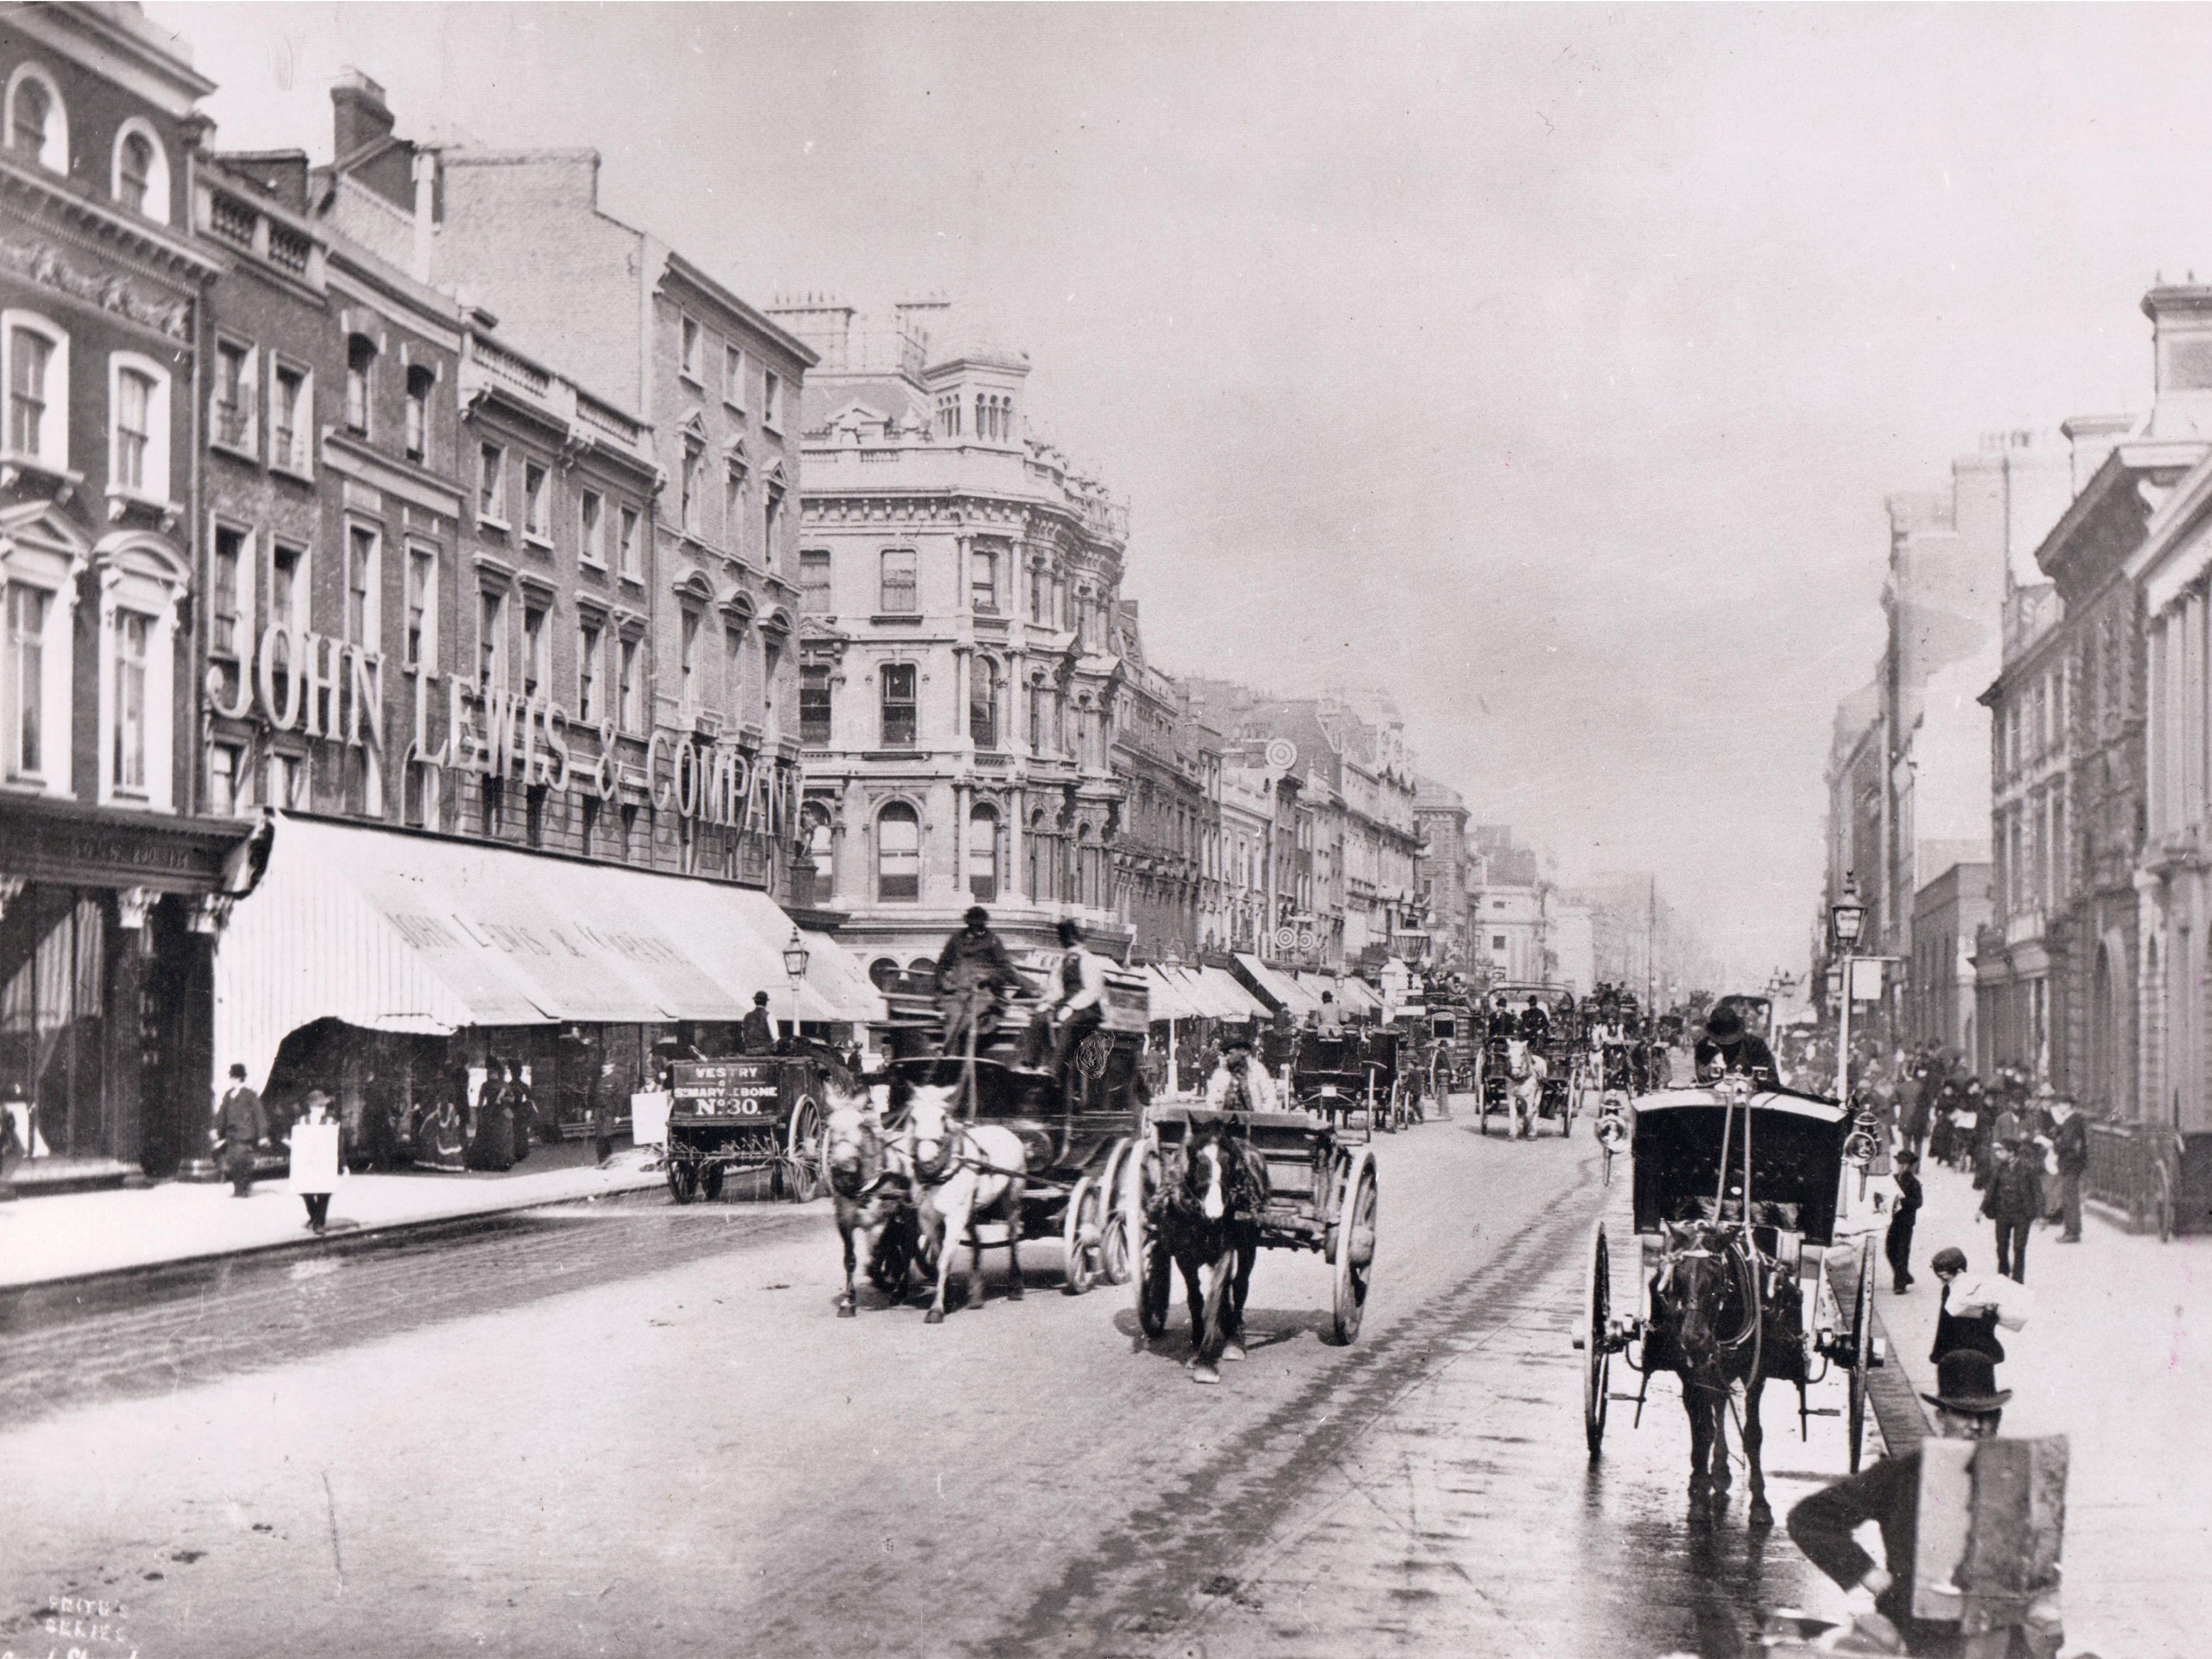 Above: The first John Lewis store pictured in 1885